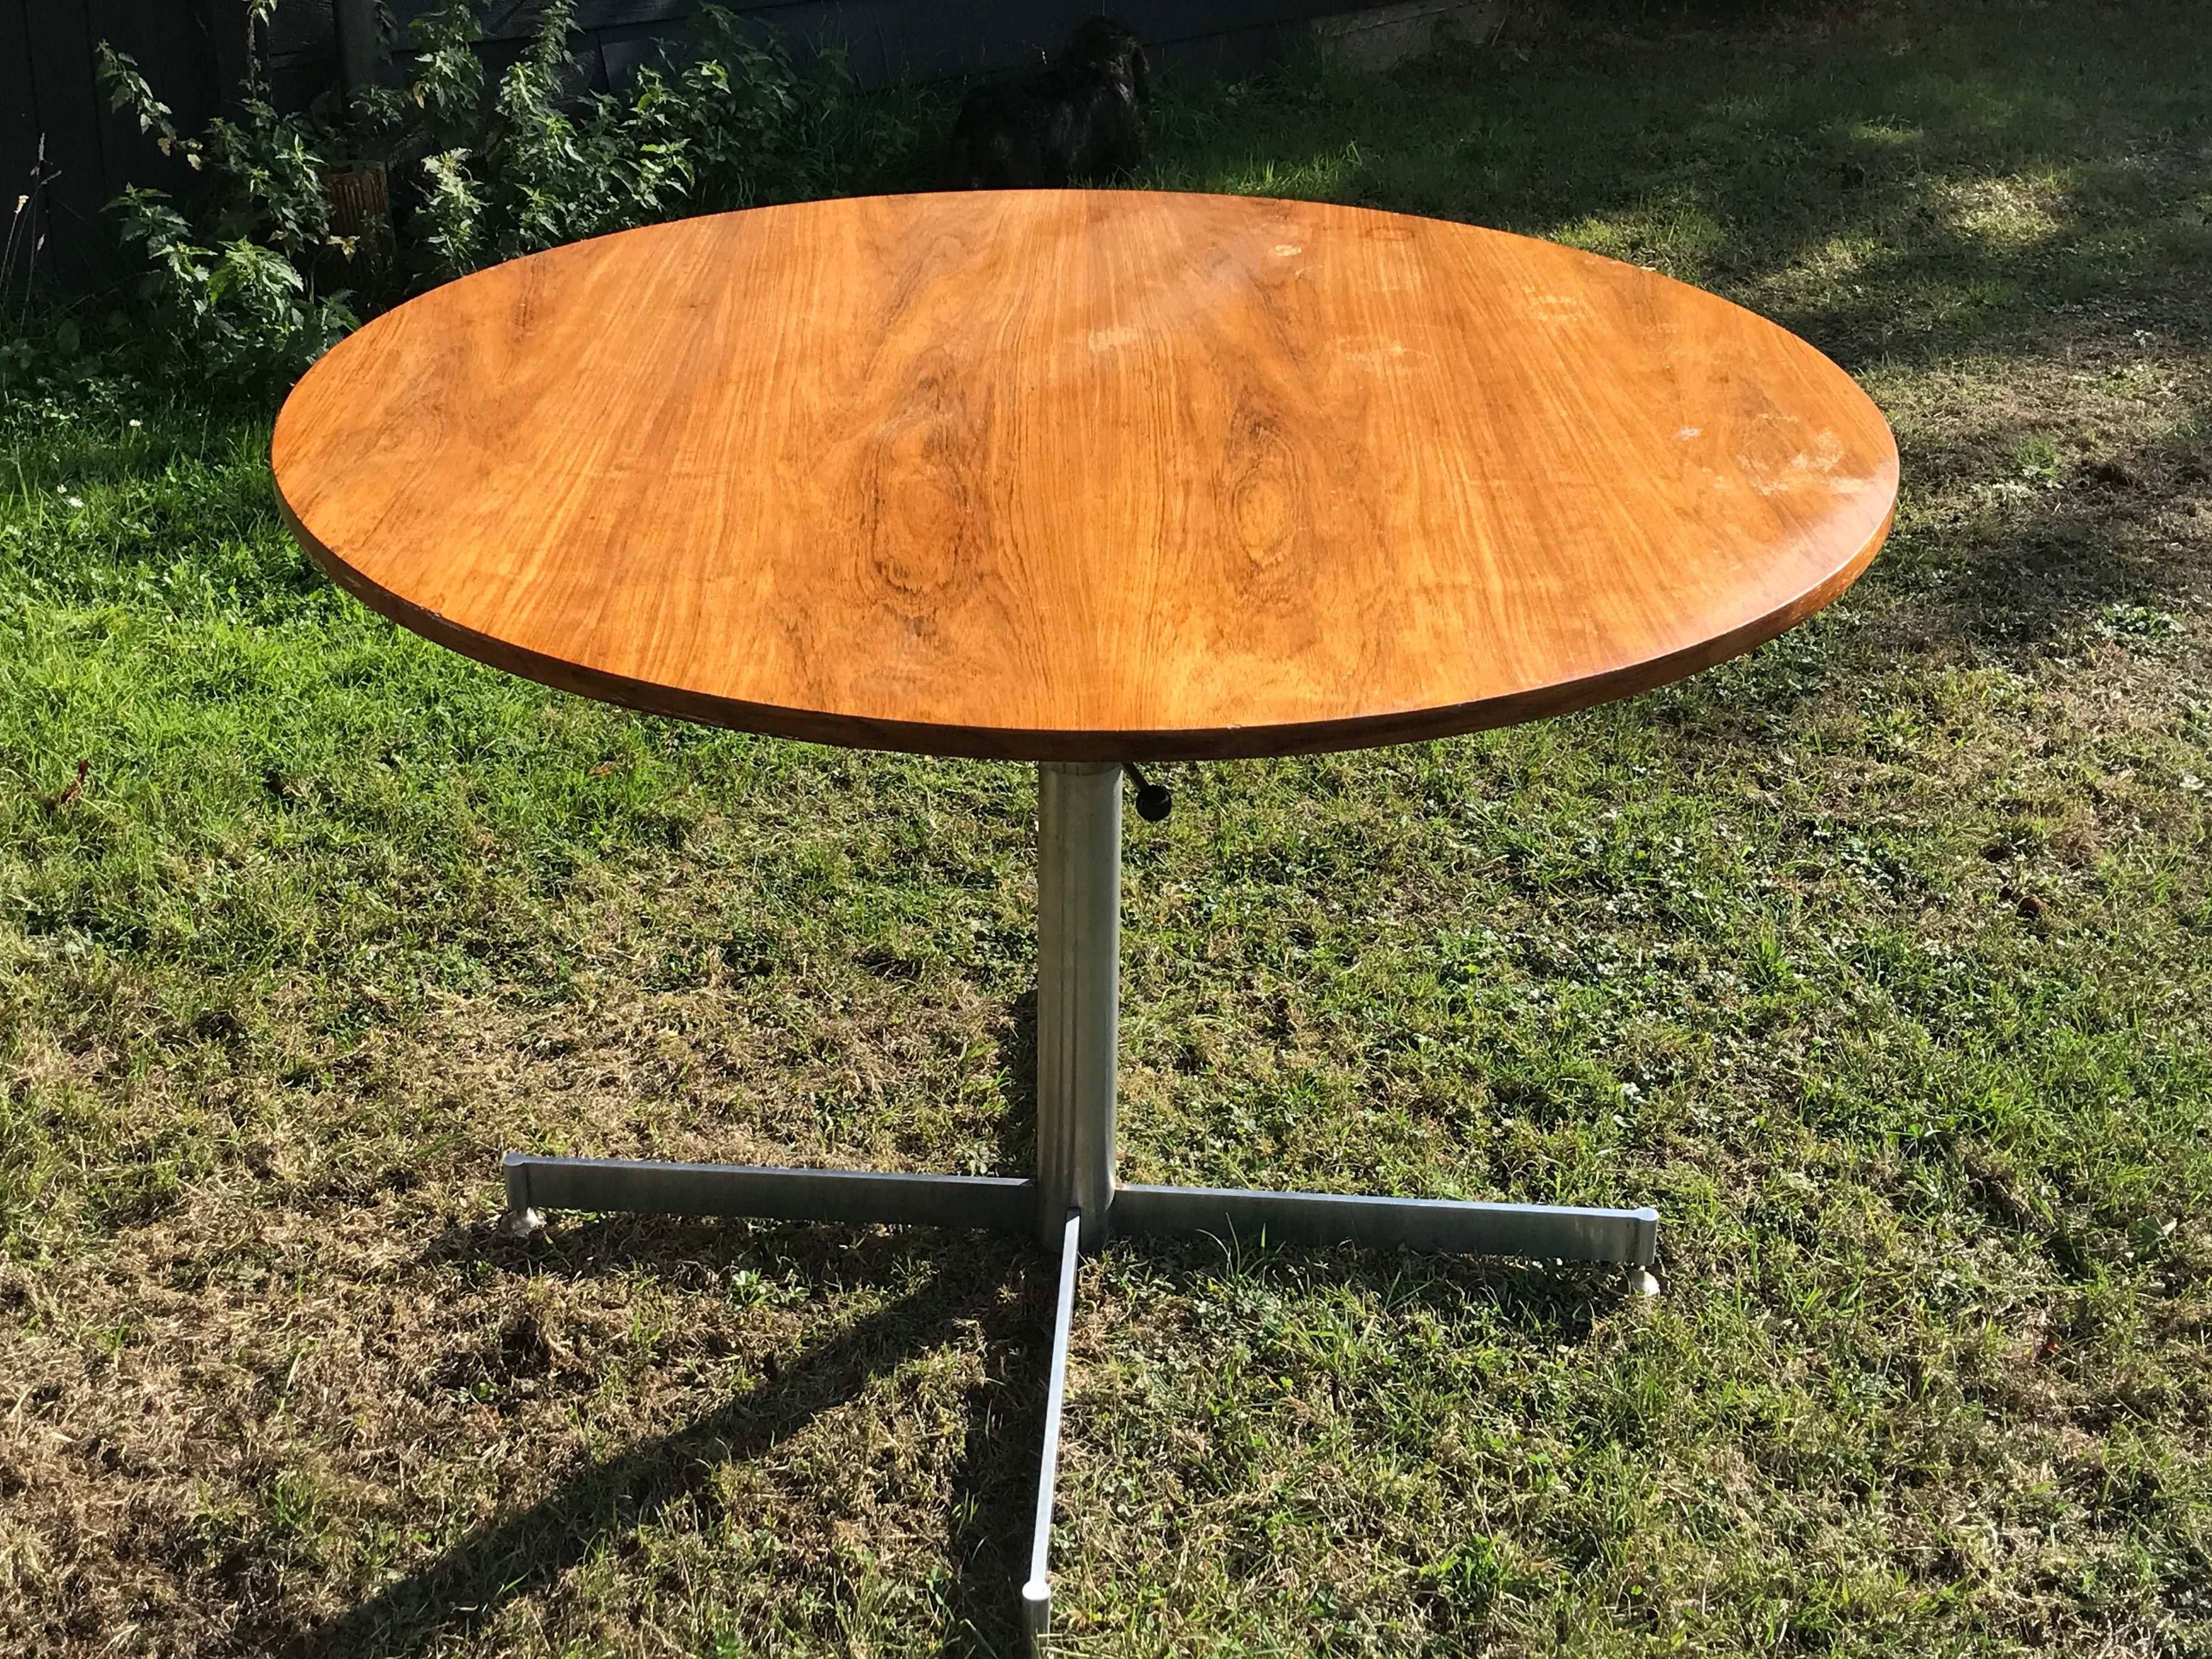 Striking, Mid-Century Modern, multi-function circular rosewood and chrome table
The adjustable rosewood top repurposes the function with the height from dining, centre, occassional to low, coffee, sofa
The rosewood top is beautifully